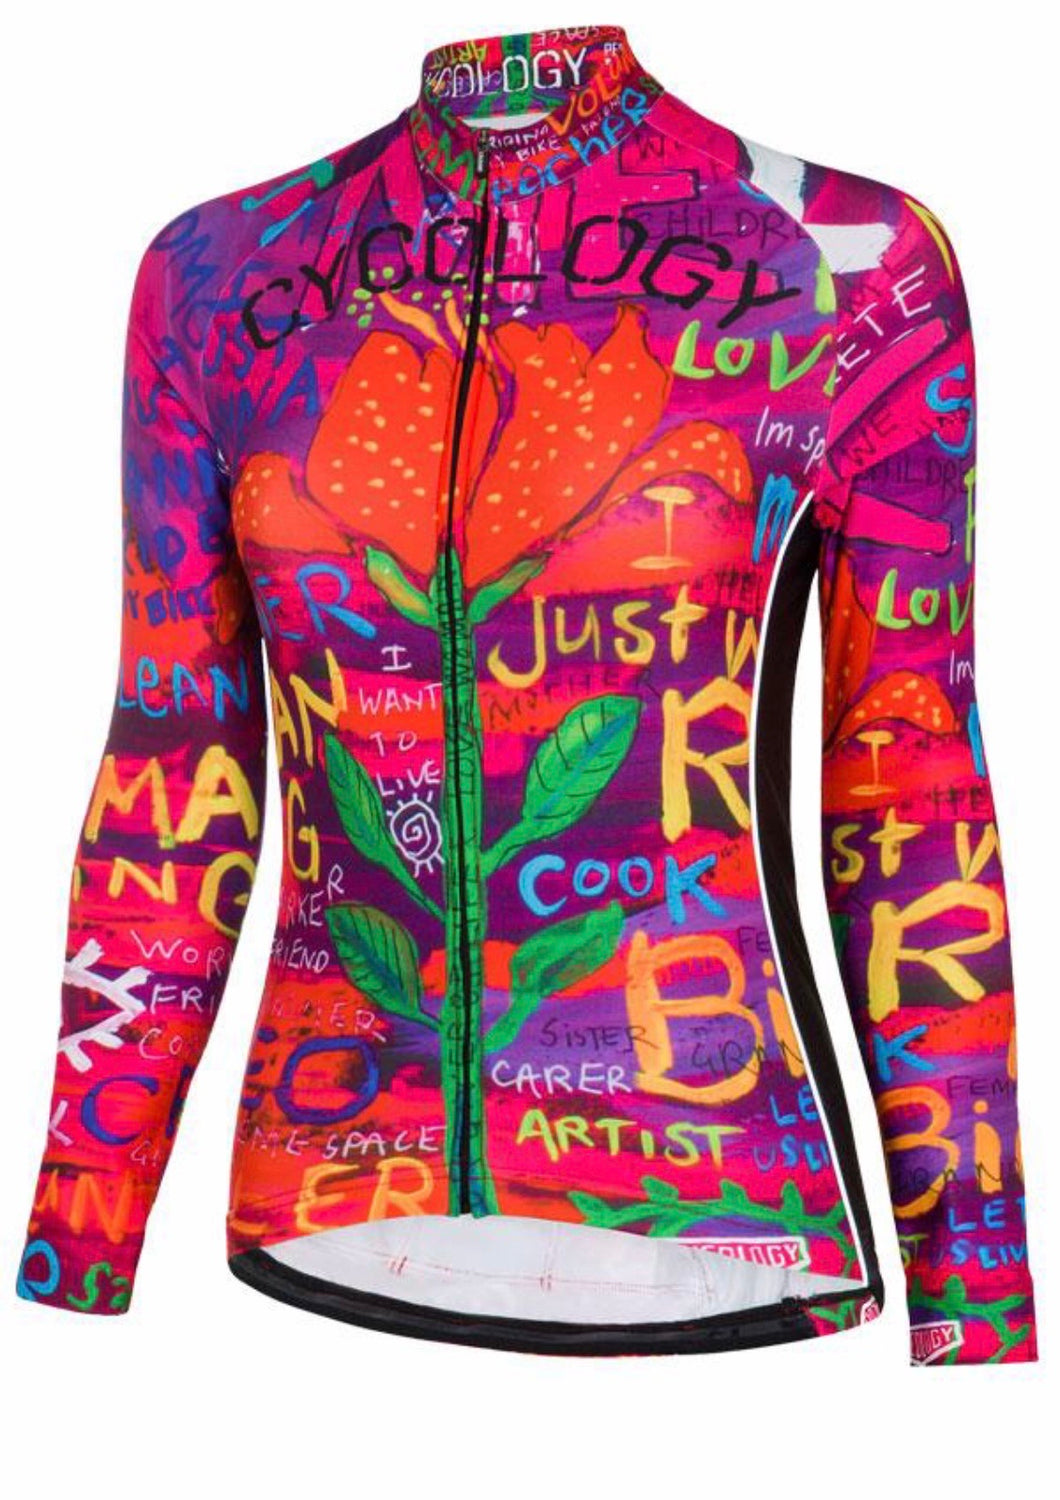 Cycology Quality Womens Long Sleeved Jersey - Design See Me!